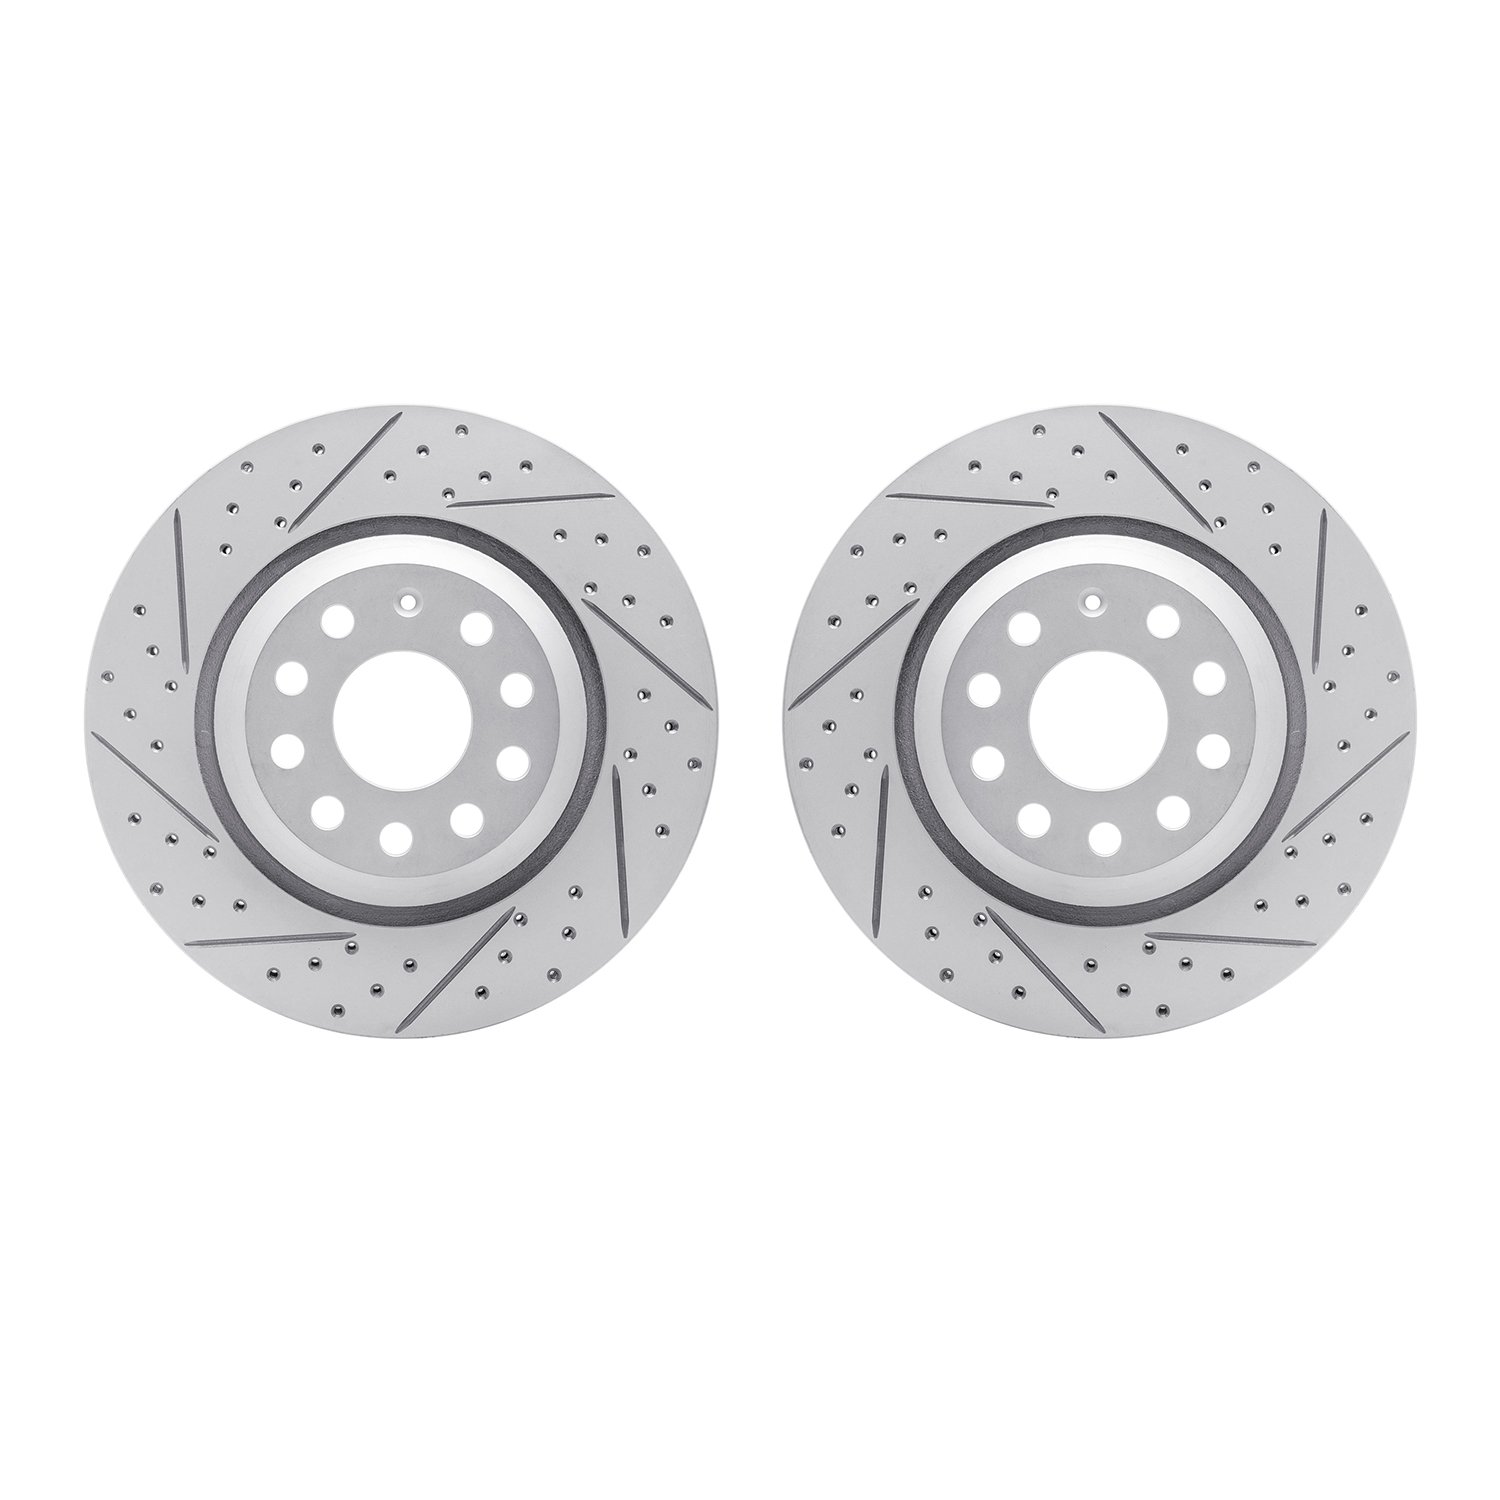 2002-74024 Geoperformance Drilled/Slotted Brake Rotors, Fits Select Audi/Volkswagen, Position: Rear